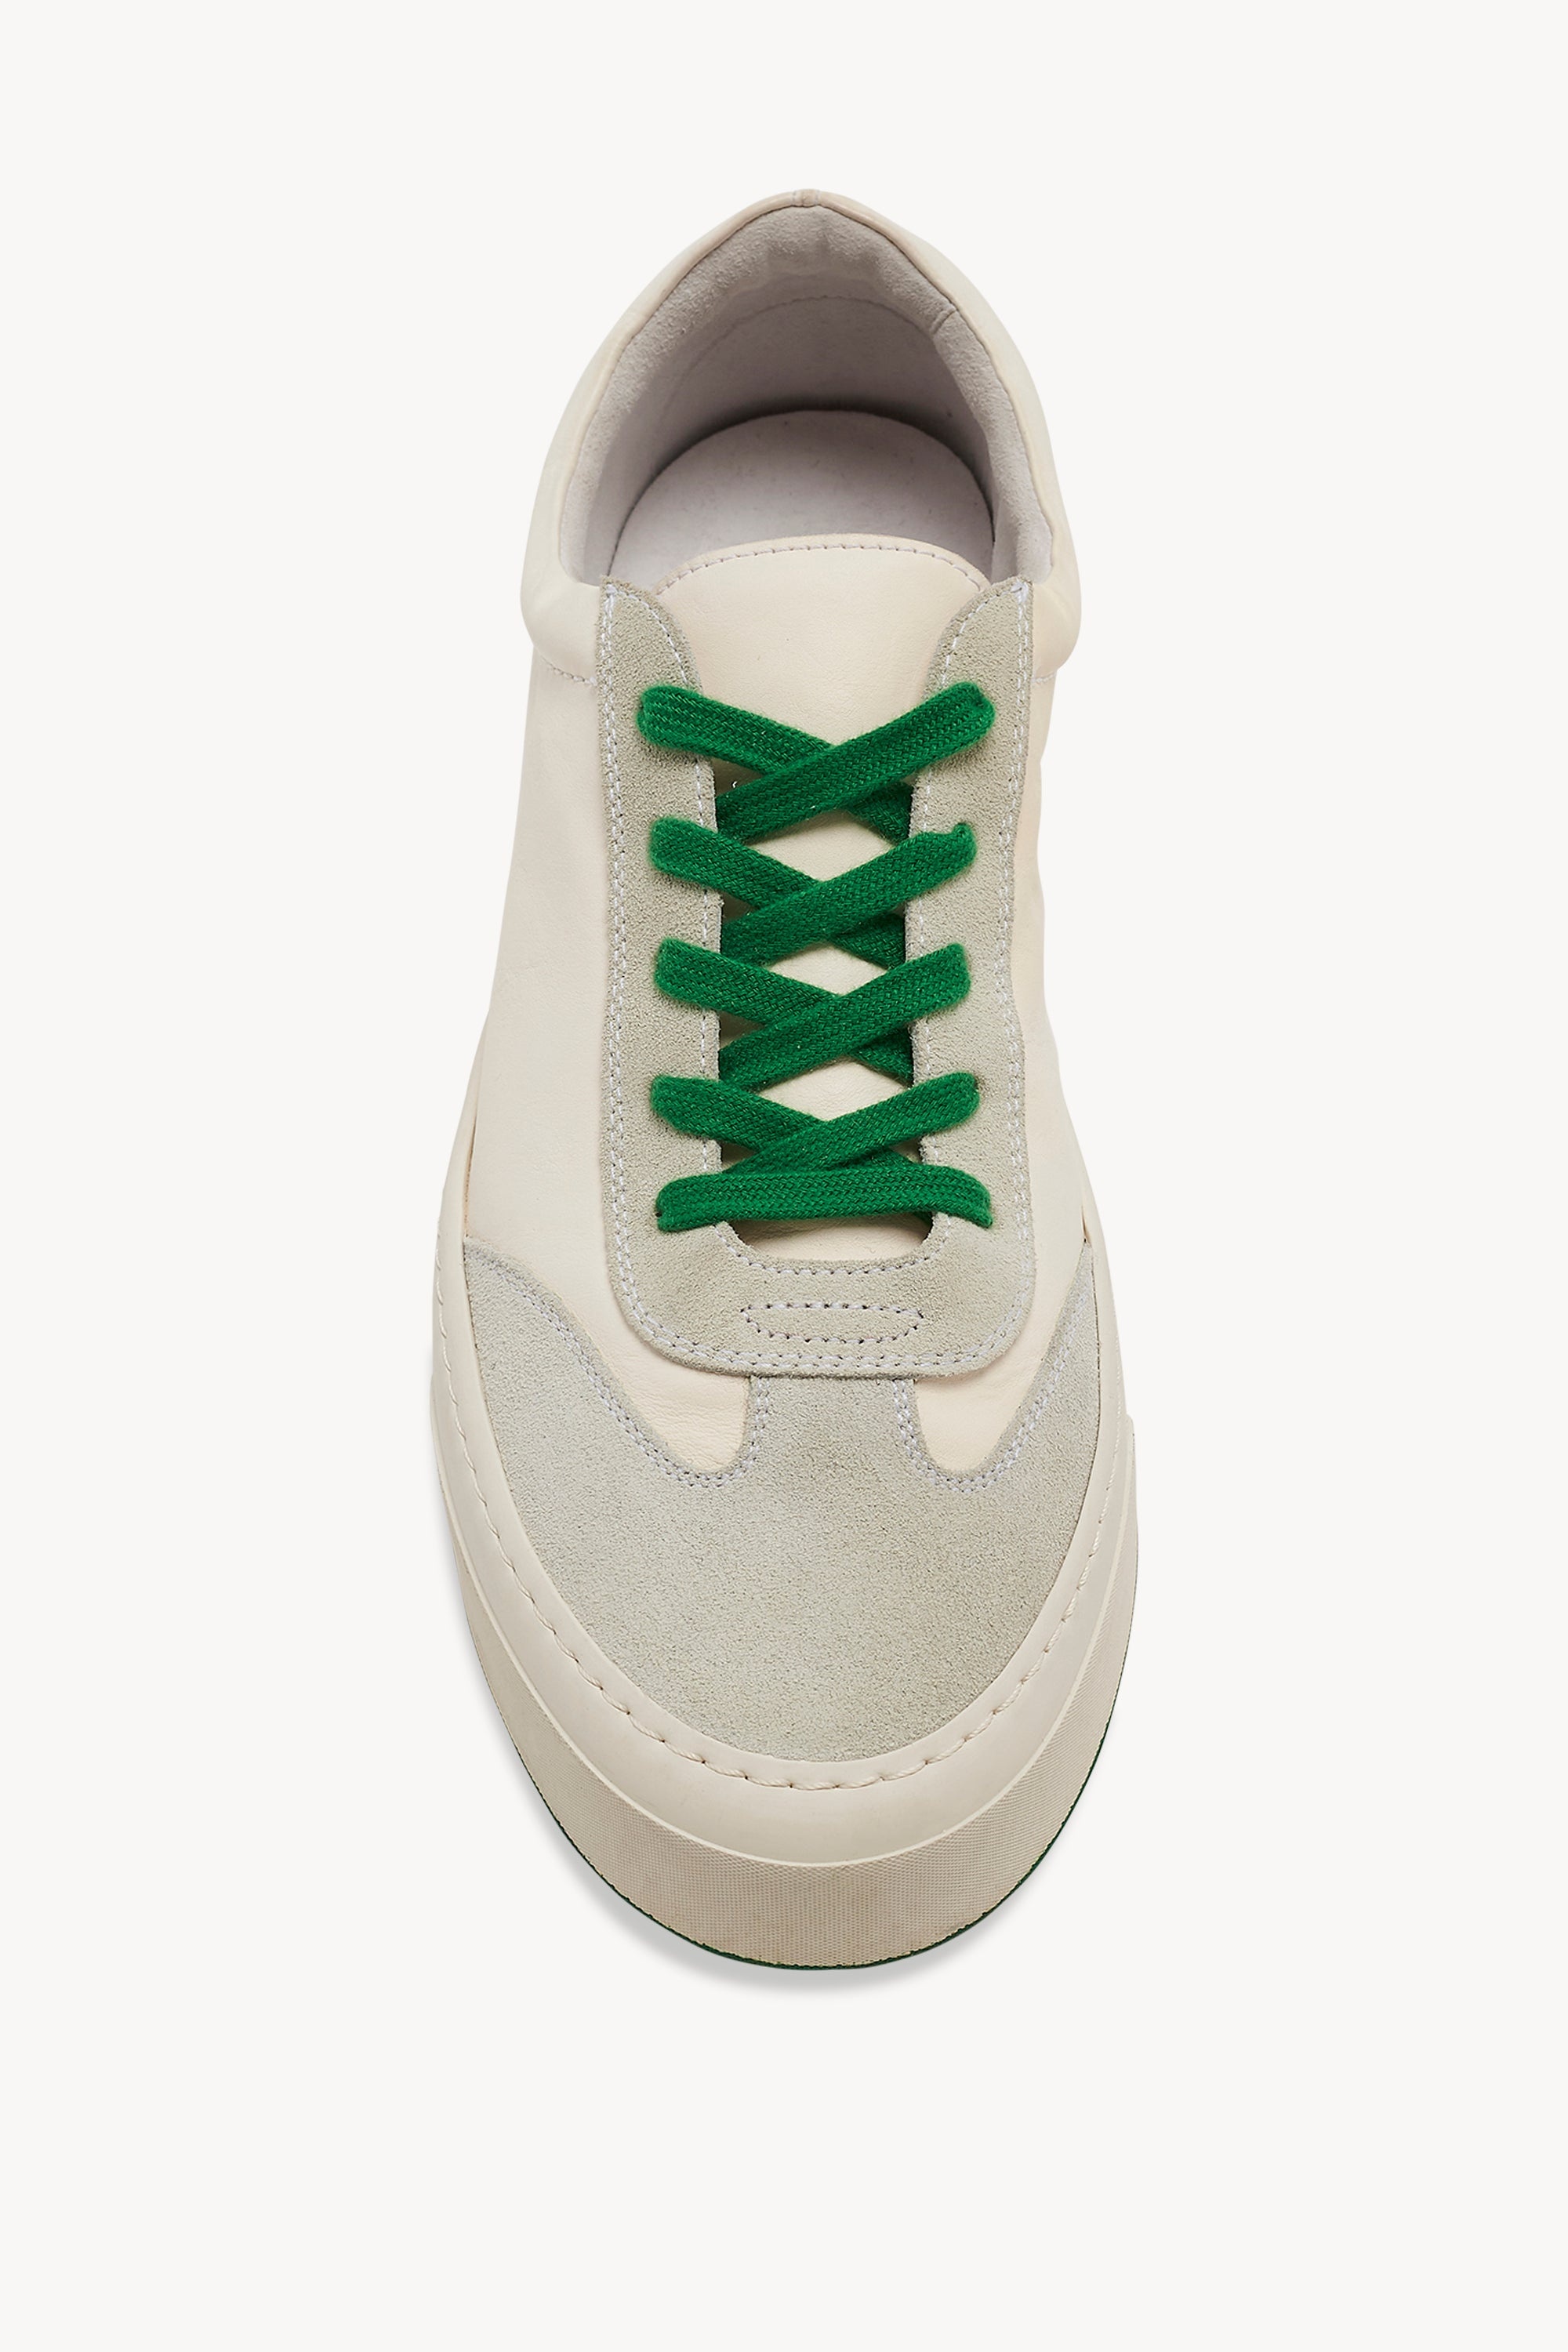 Marley Lace-Up Sneaker in Leather and Suede - 3